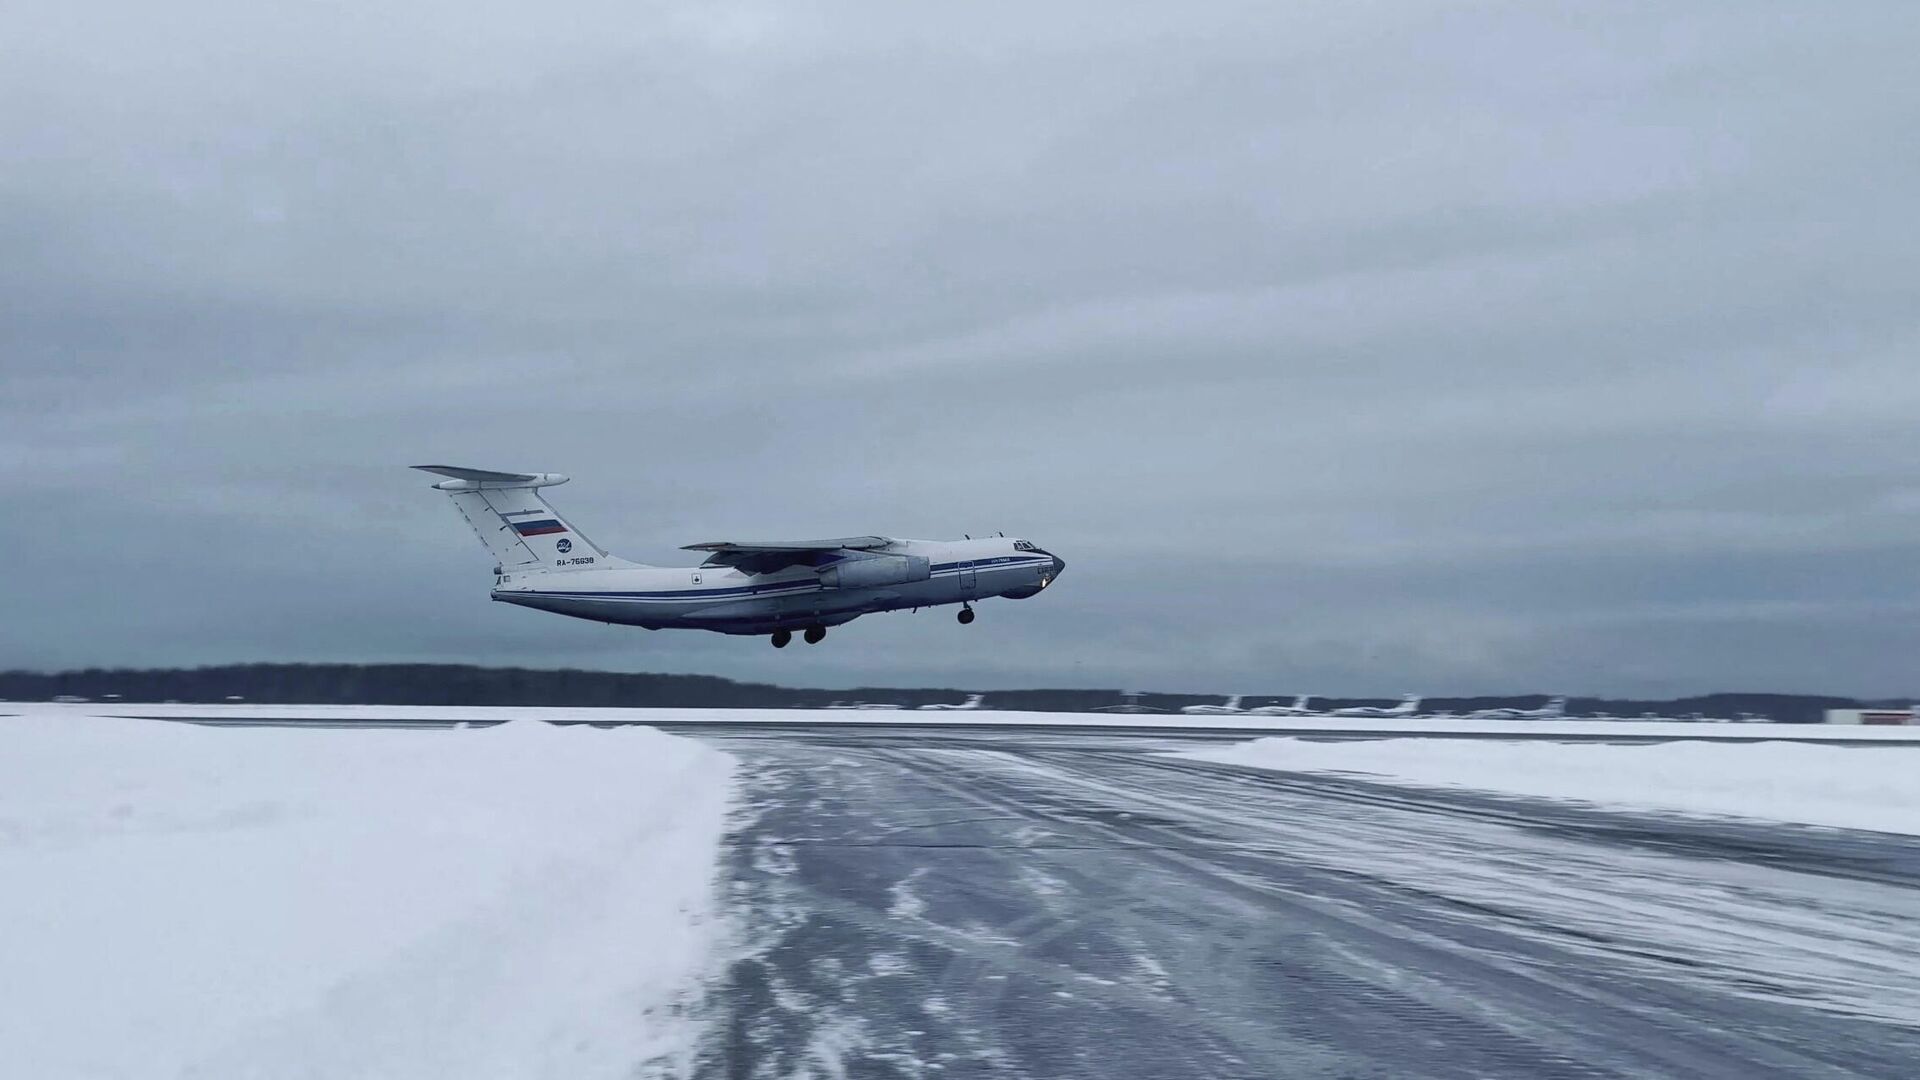 A military aircraft carrying Russian servicemen takes off from an airfield on its way to Kazakhstan, outside Moscow, Russia January 6, 2022, in this still image taken from video. Russian paratroopers have been deployed to Kazakhstan as part of a peacekeeping force that includes troops from four other former Soviet republics. - Sputnik International, 1920, 06.01.2022